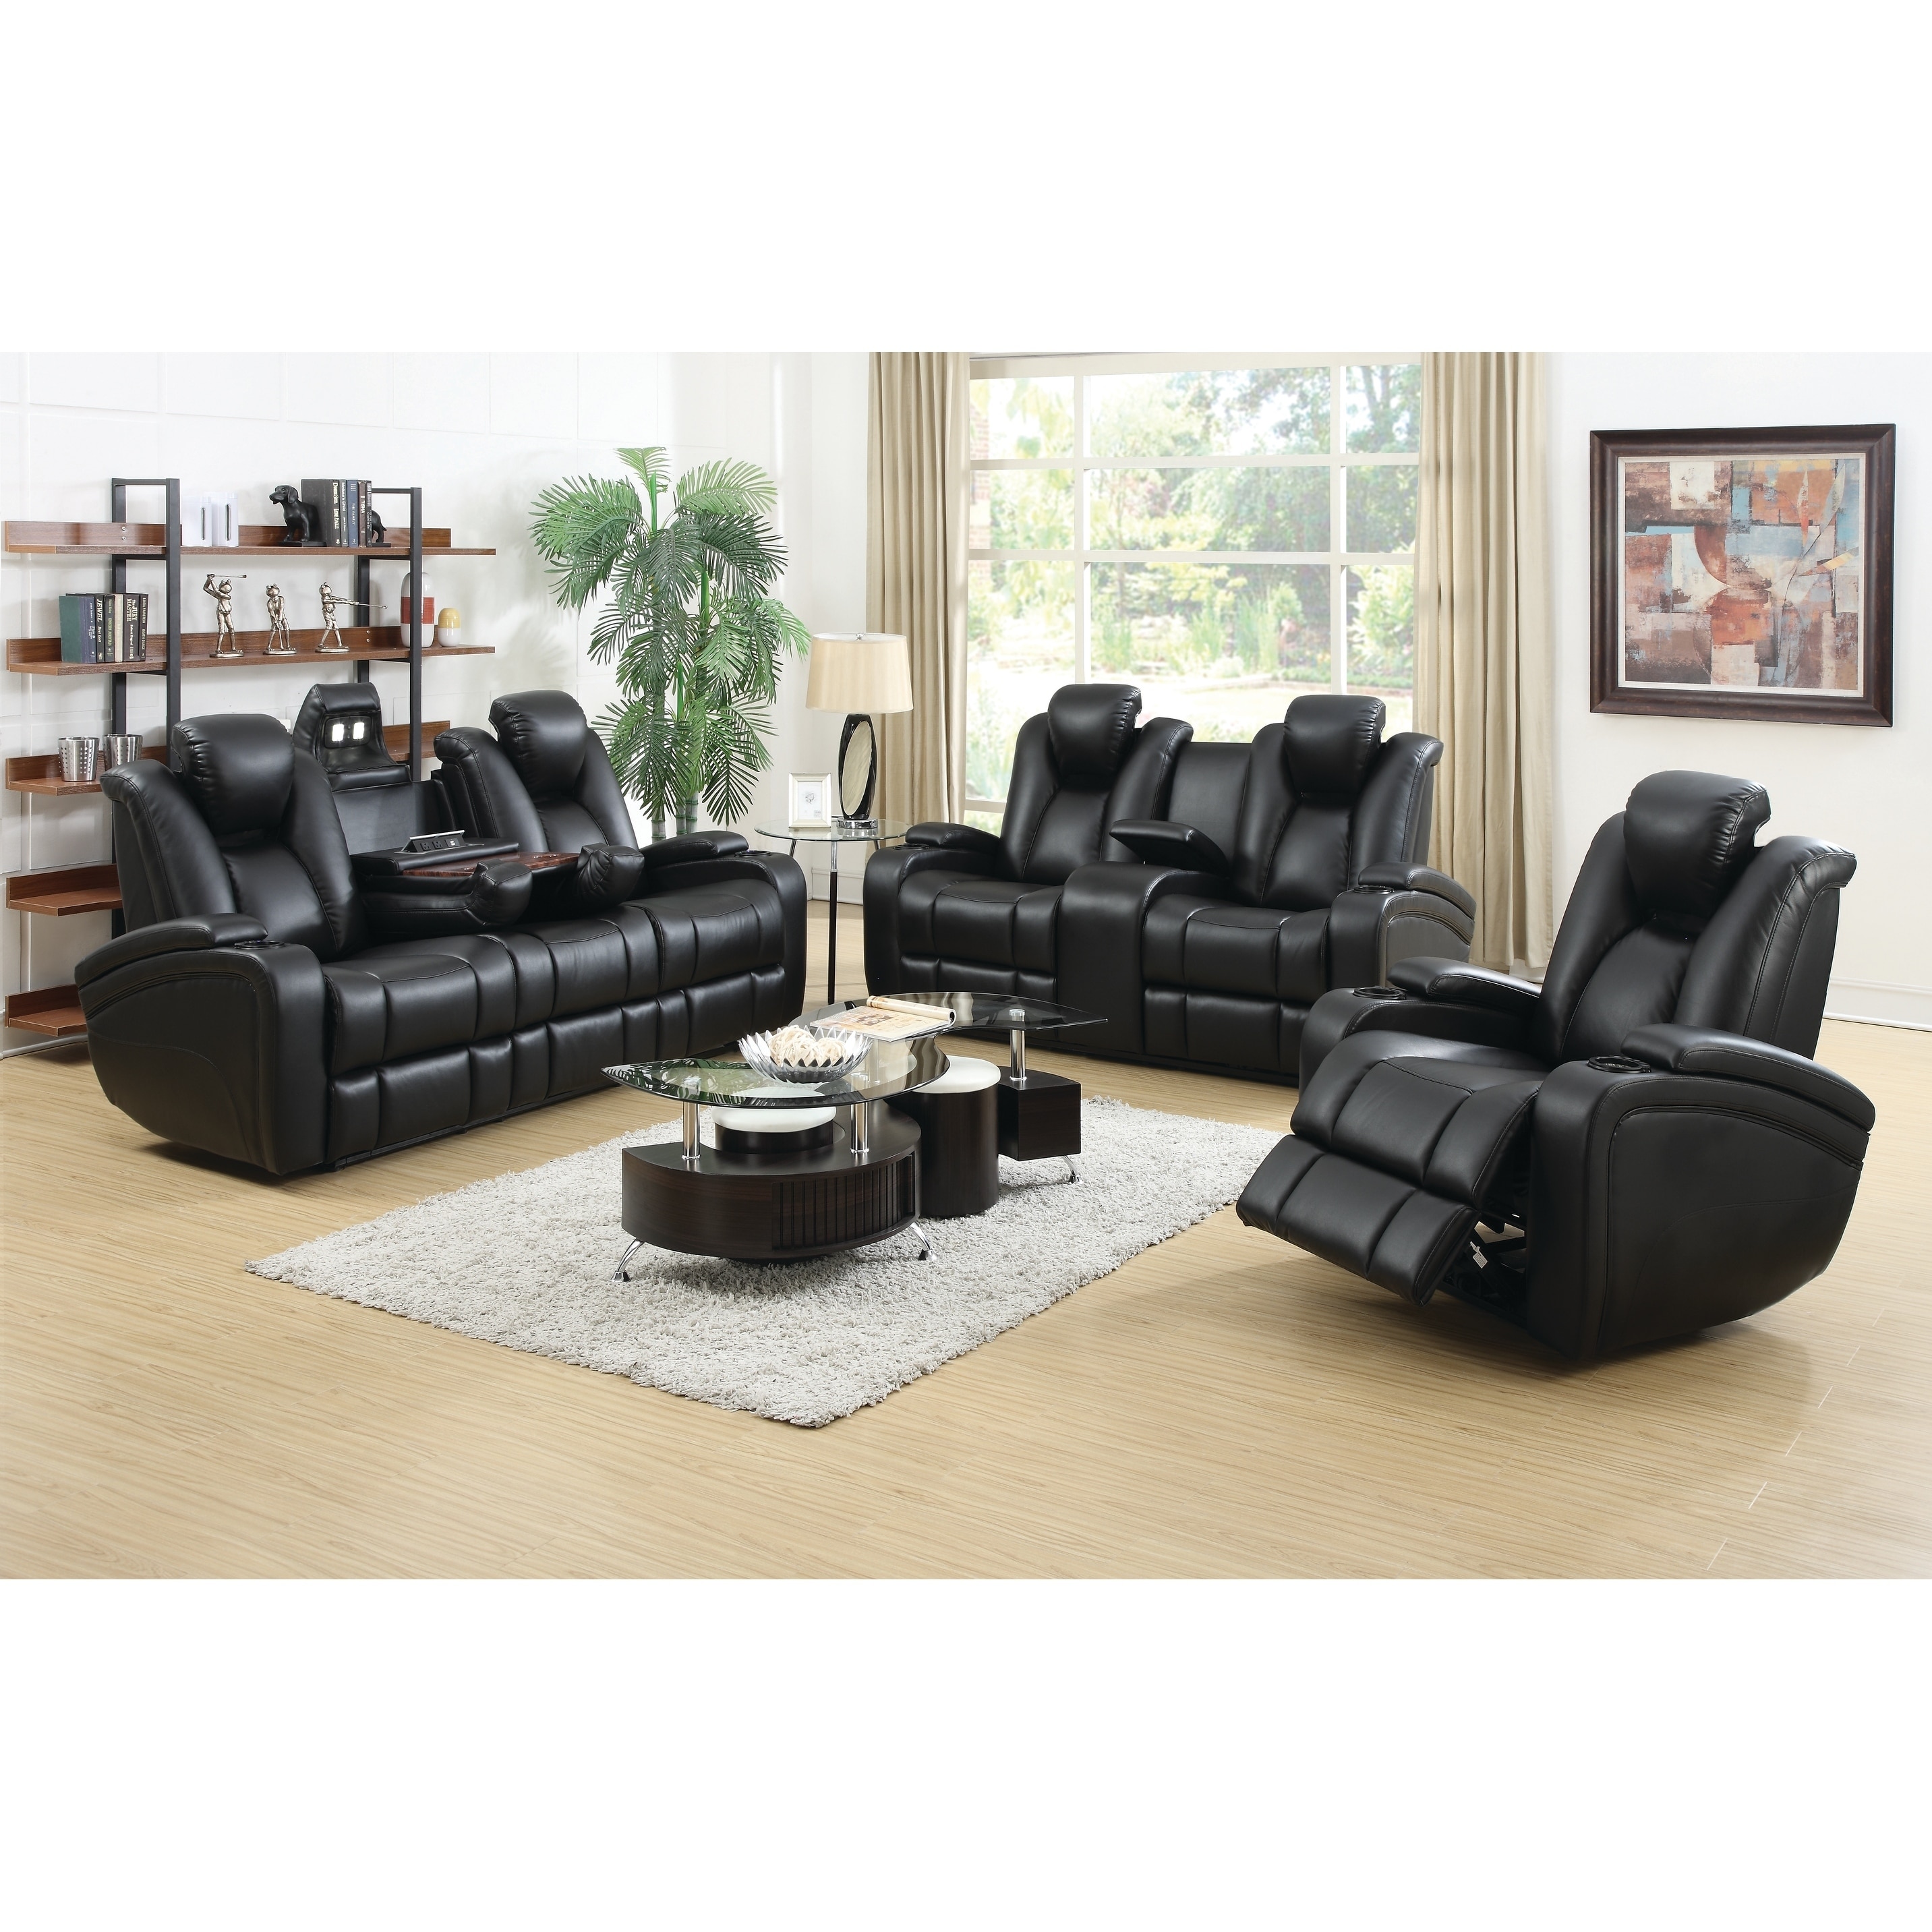 Zimmerman Black 3 Piece Faux Leather Power Motion Living Room Set Overstock 21862541